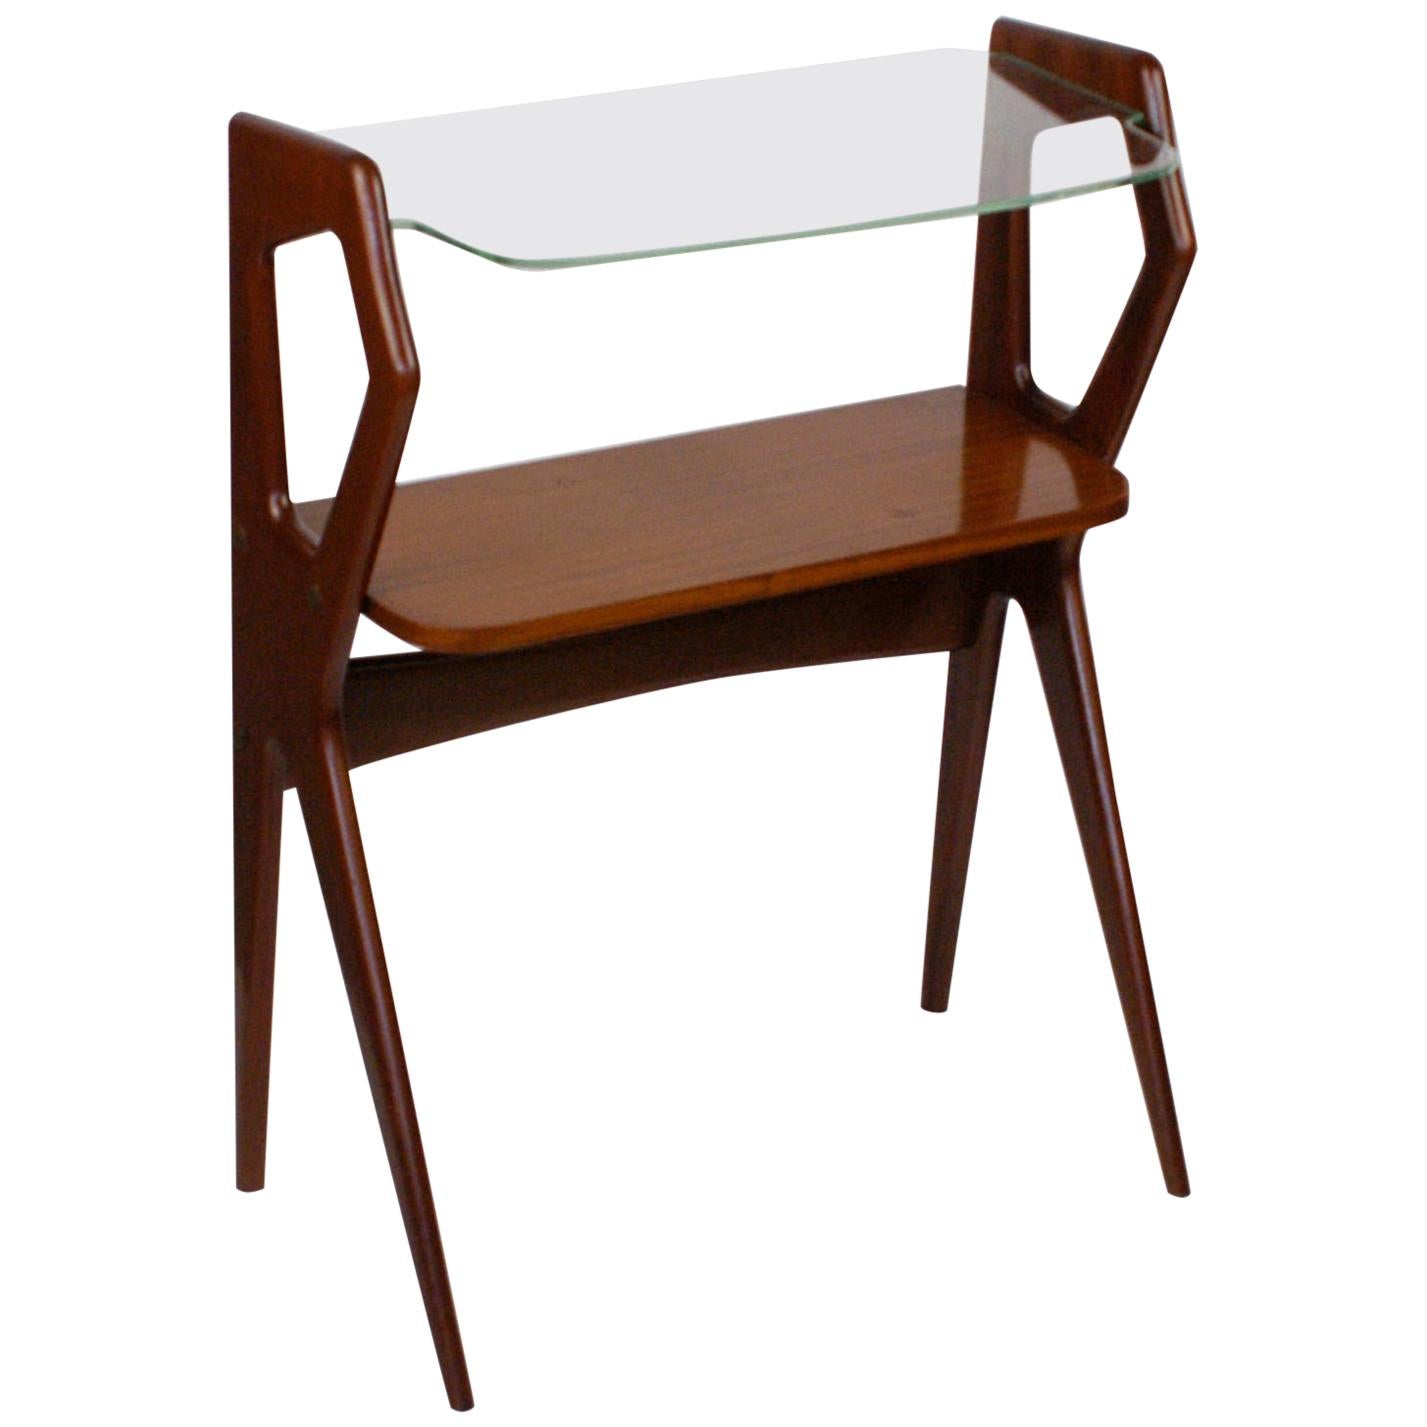 Italian Midcentury Mahogany Console Table in the Style of Ico Parisi